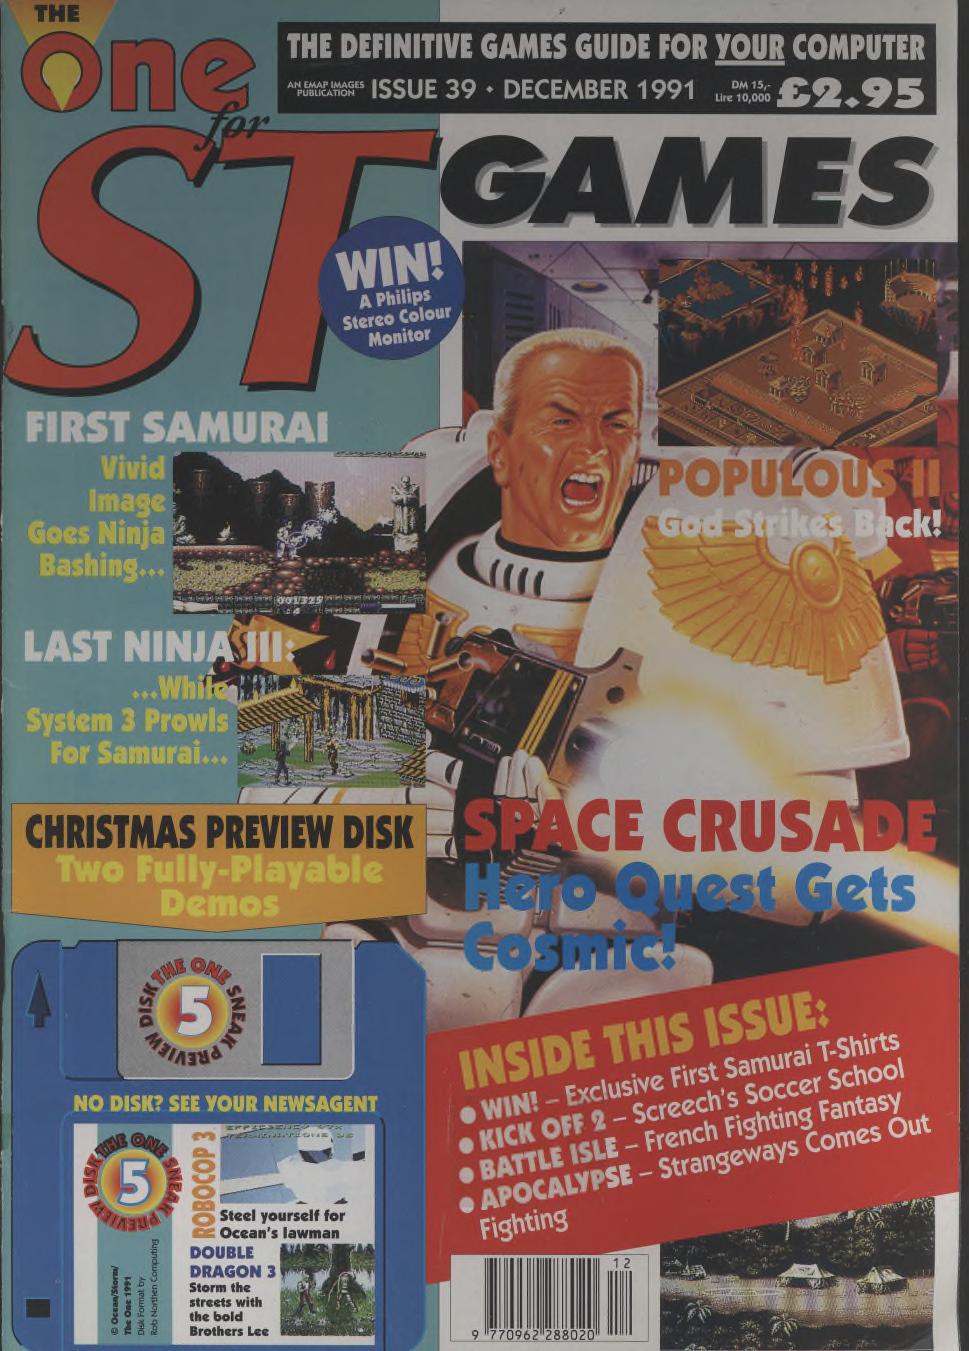 Cover for The One 39 (Dec 1991)